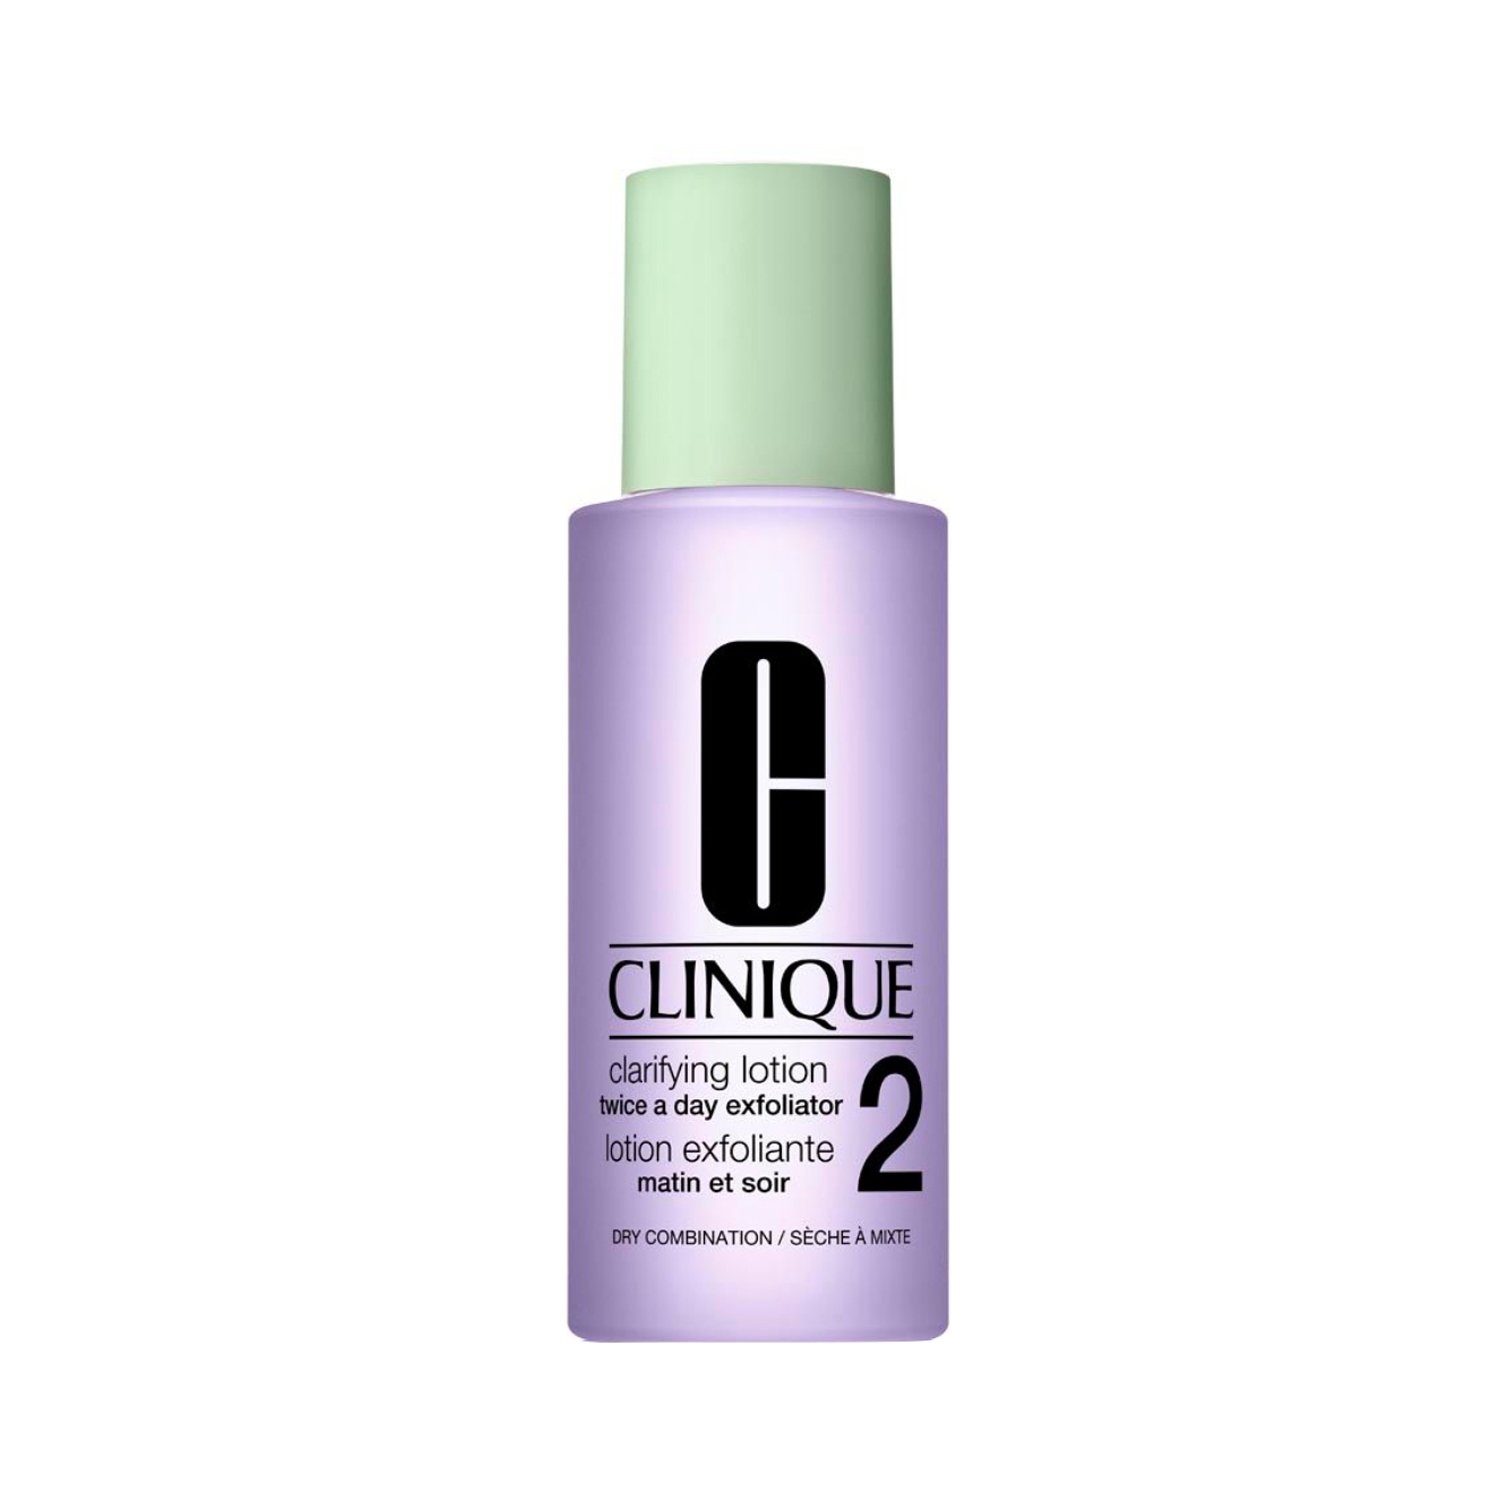 CLINIQUE Clarifying Lotion Twice A Day Exfoliator 2 (60ml)